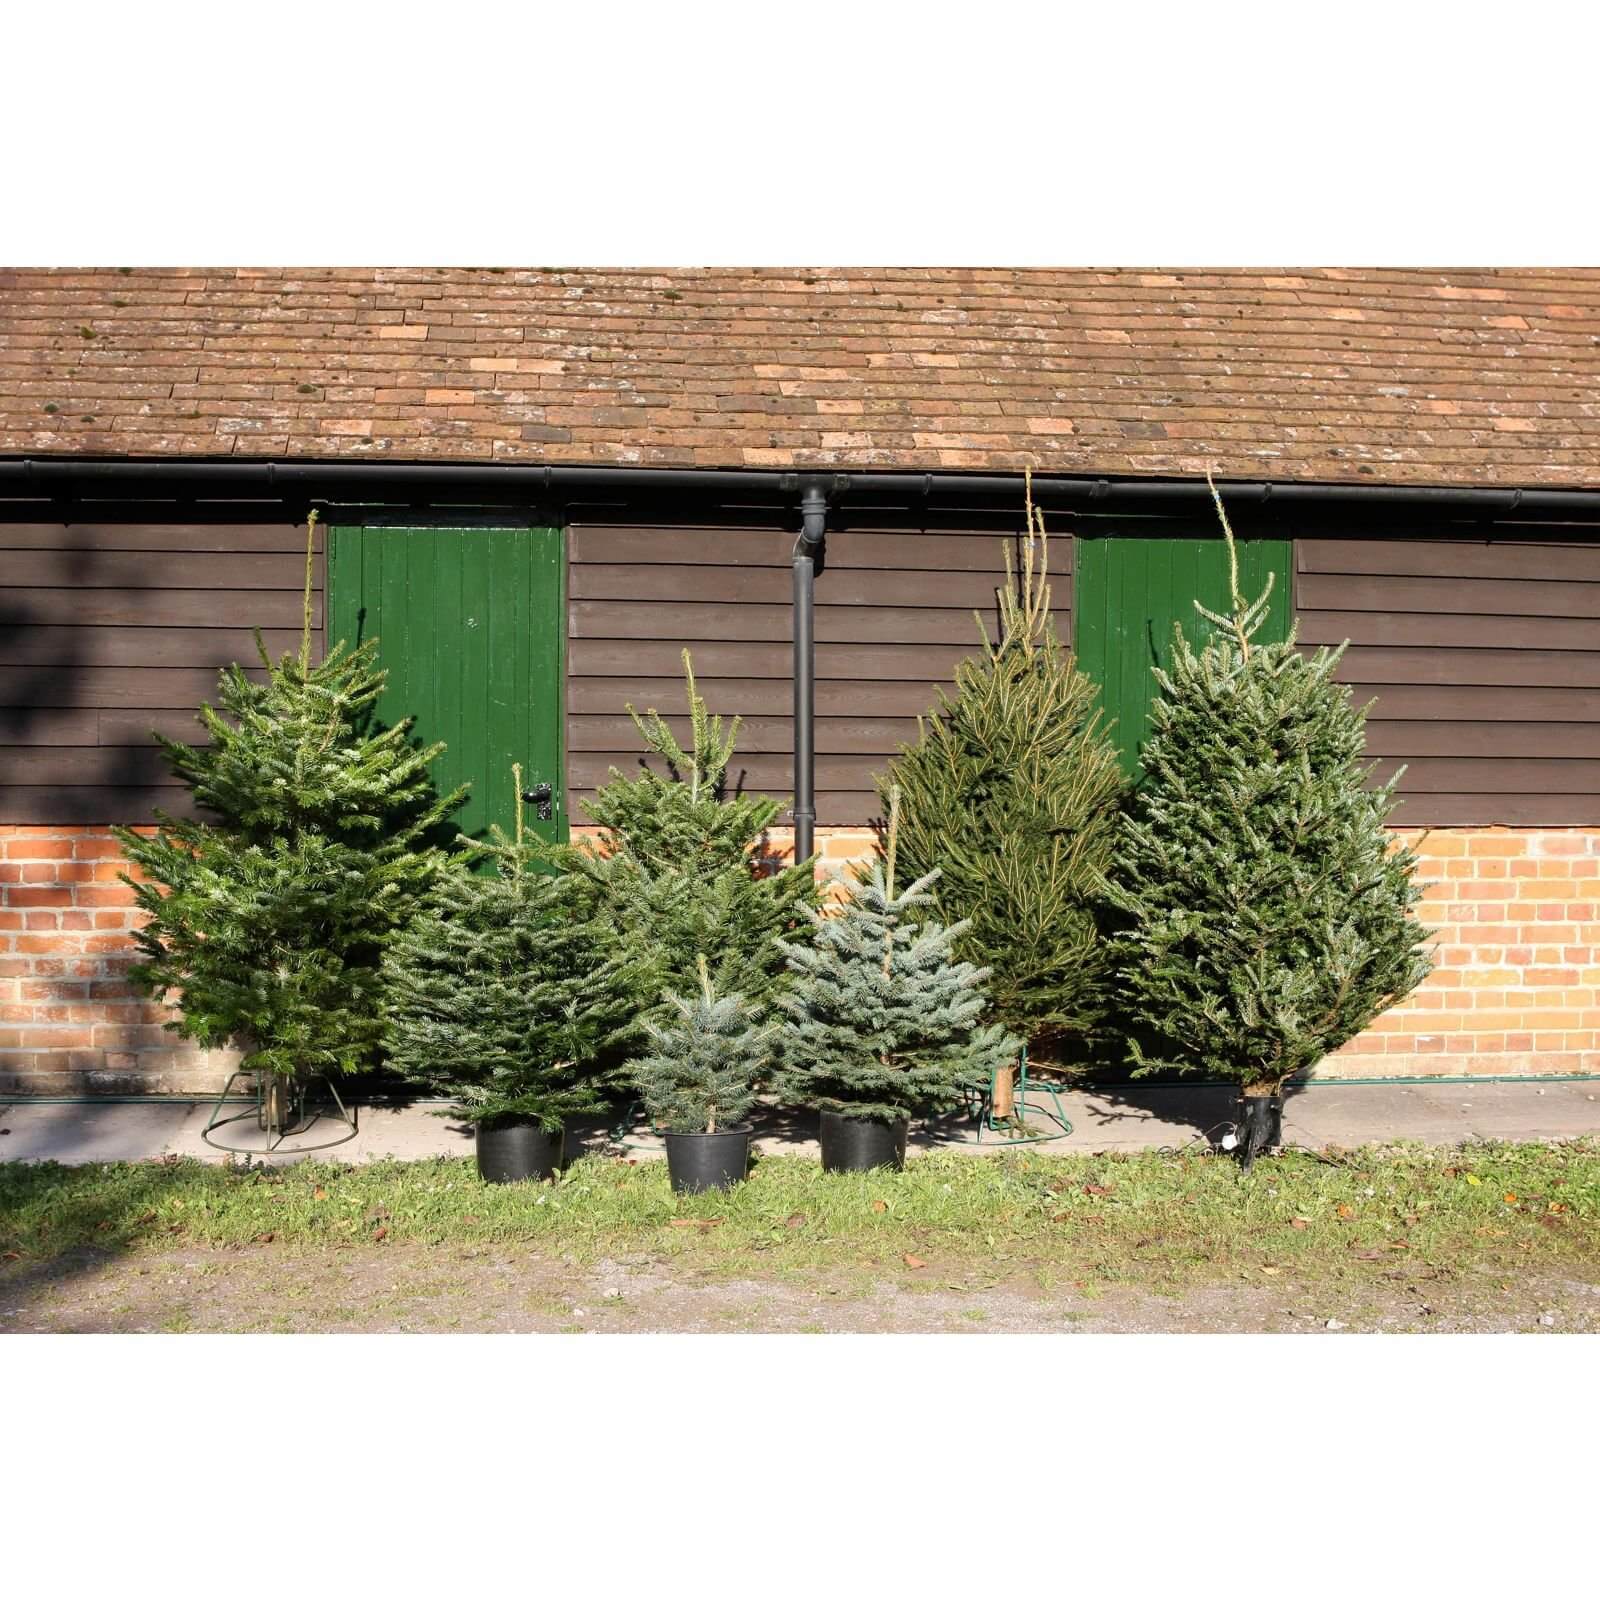 80-110cm (2.5-3ft) Living Pot Grown Norway Spruce Real Christmas Tree